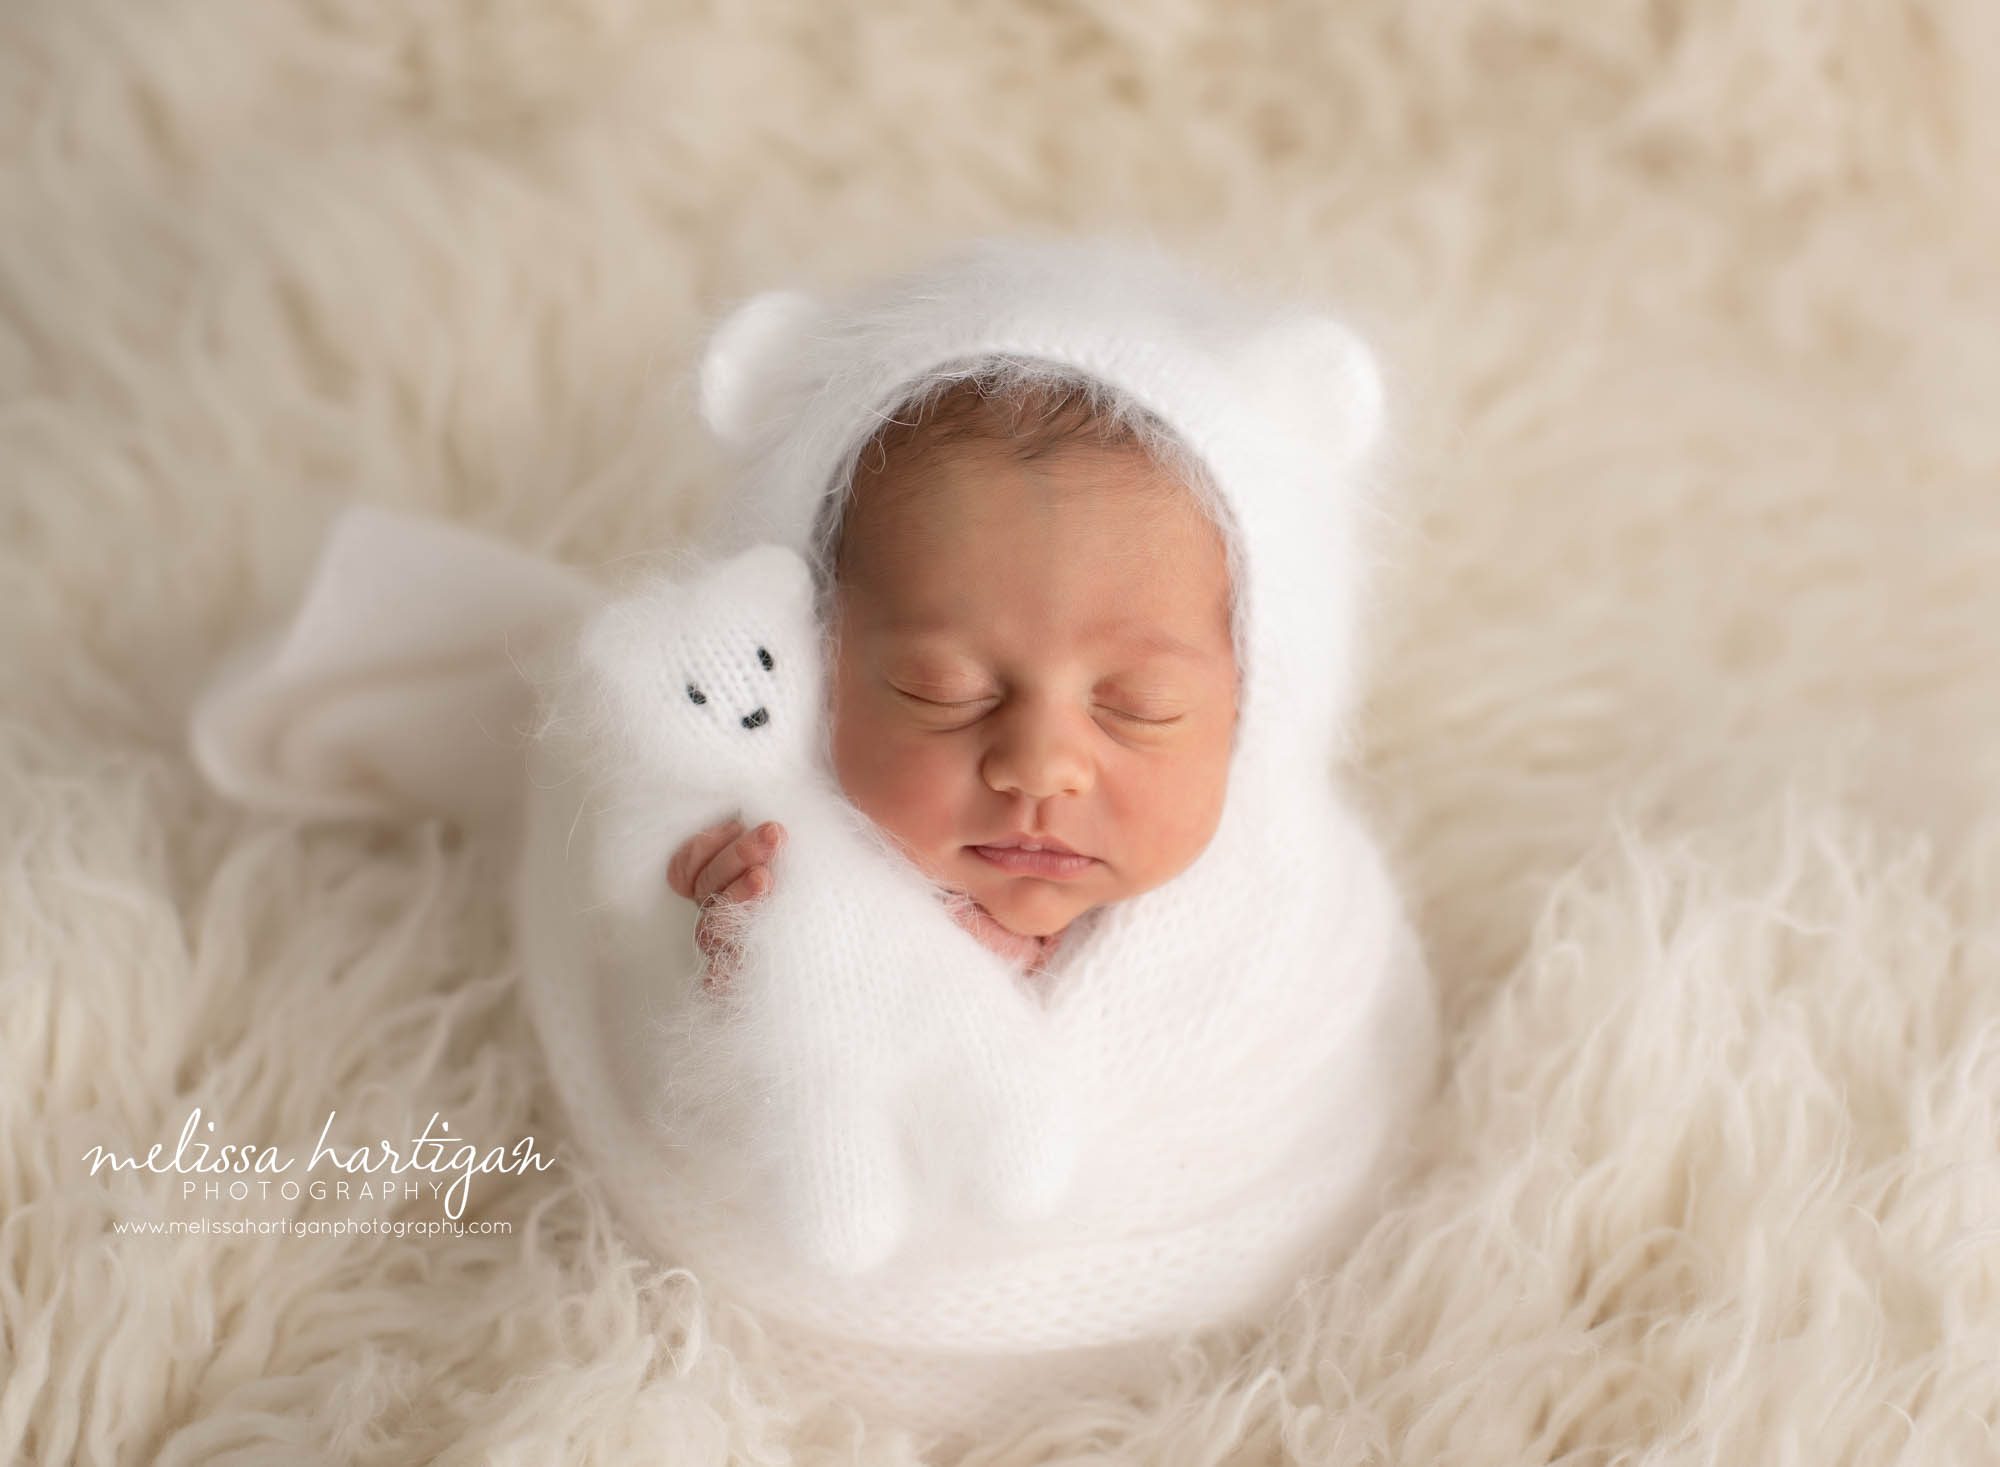 newborn baby wrapped in white wrap with matching bear bonnet holding miniature knitted teddy bear